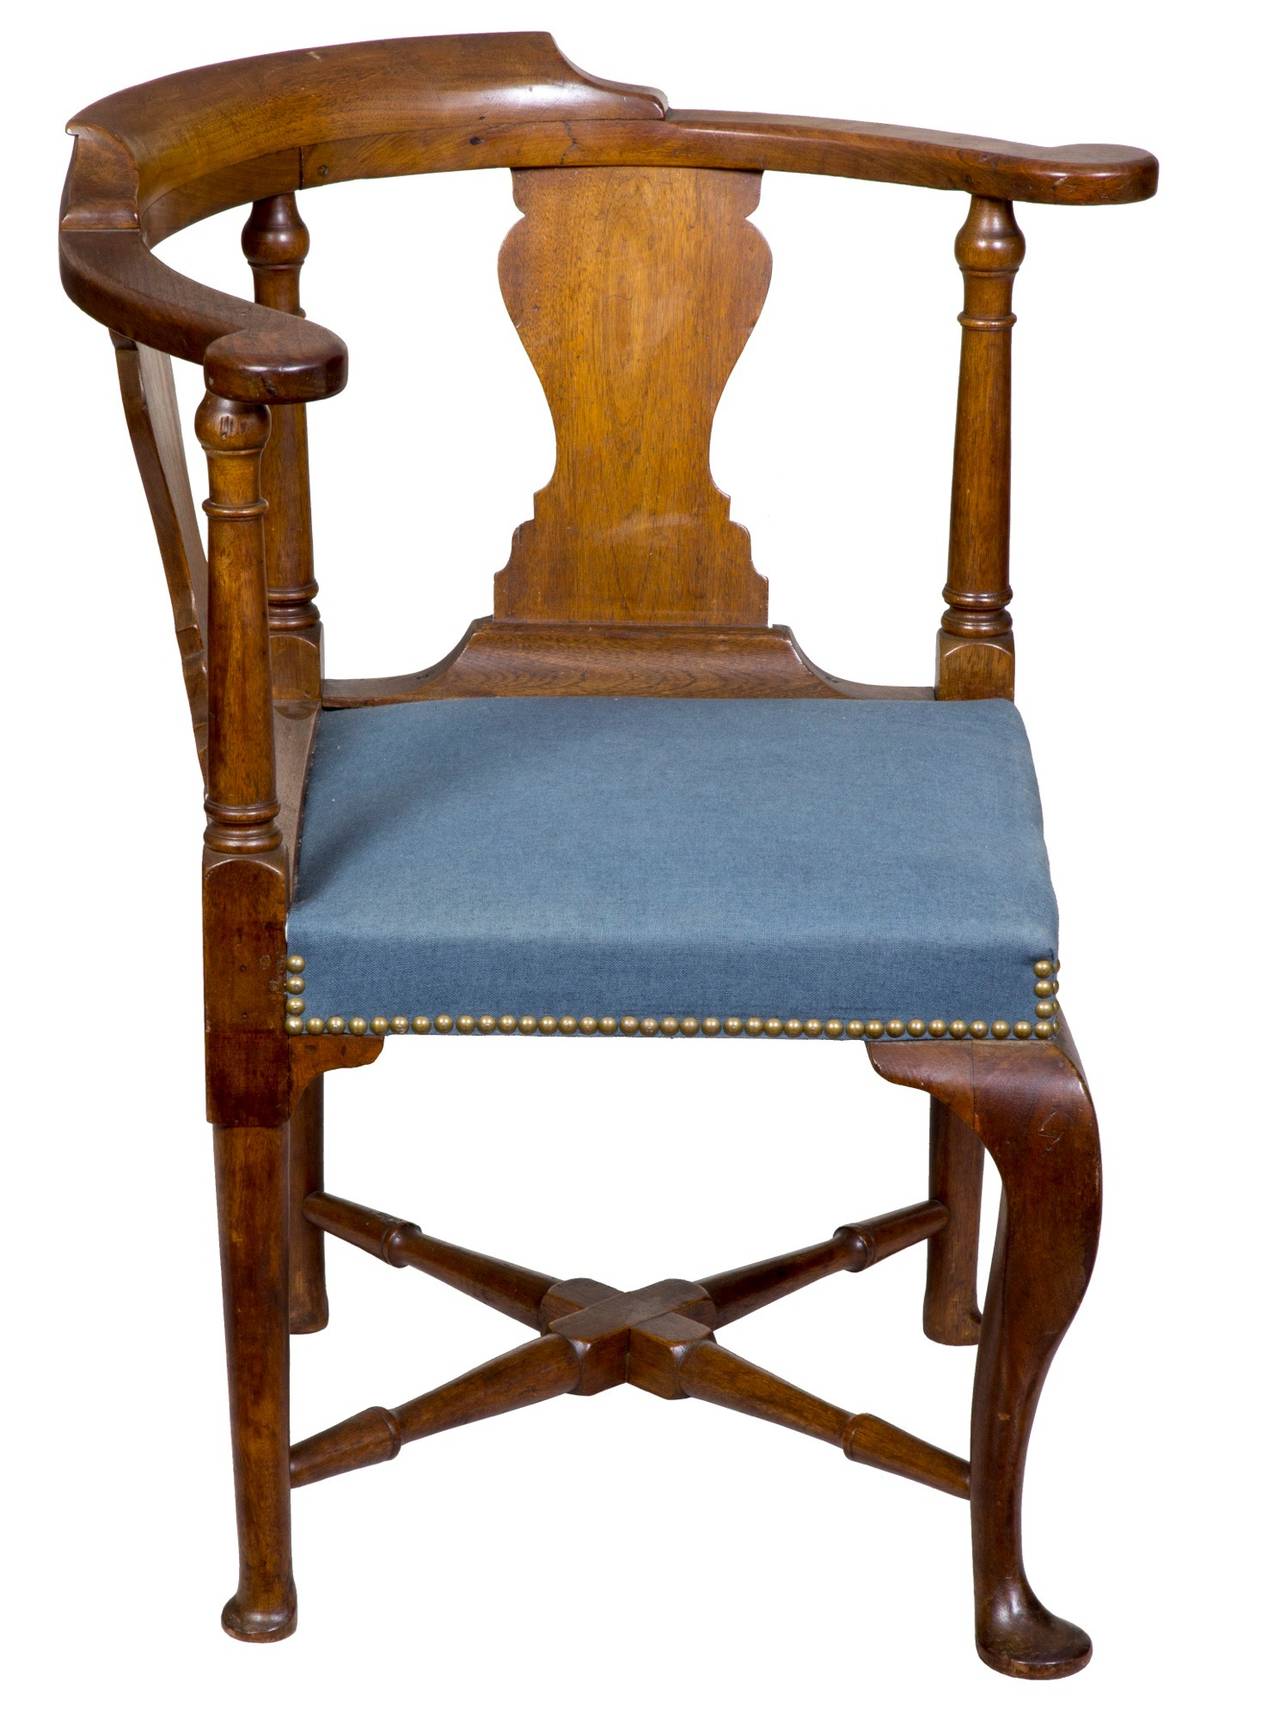 North American Early Queen Anne Walnut Corner Chair, Massachusetts, circa 1750 For Sale